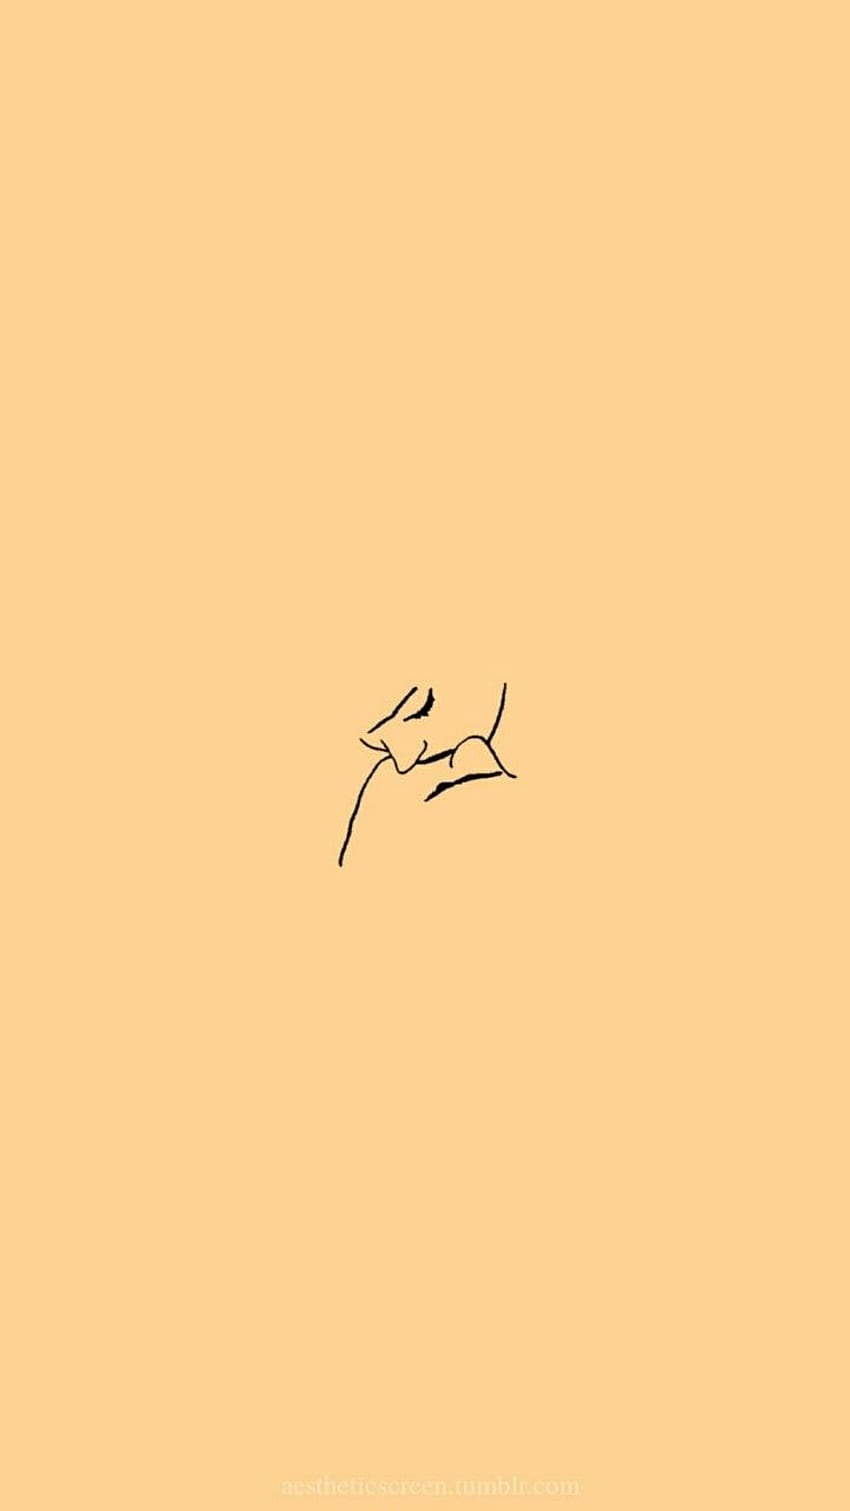 A hand drawing of an animal on yellow background - Minimalist